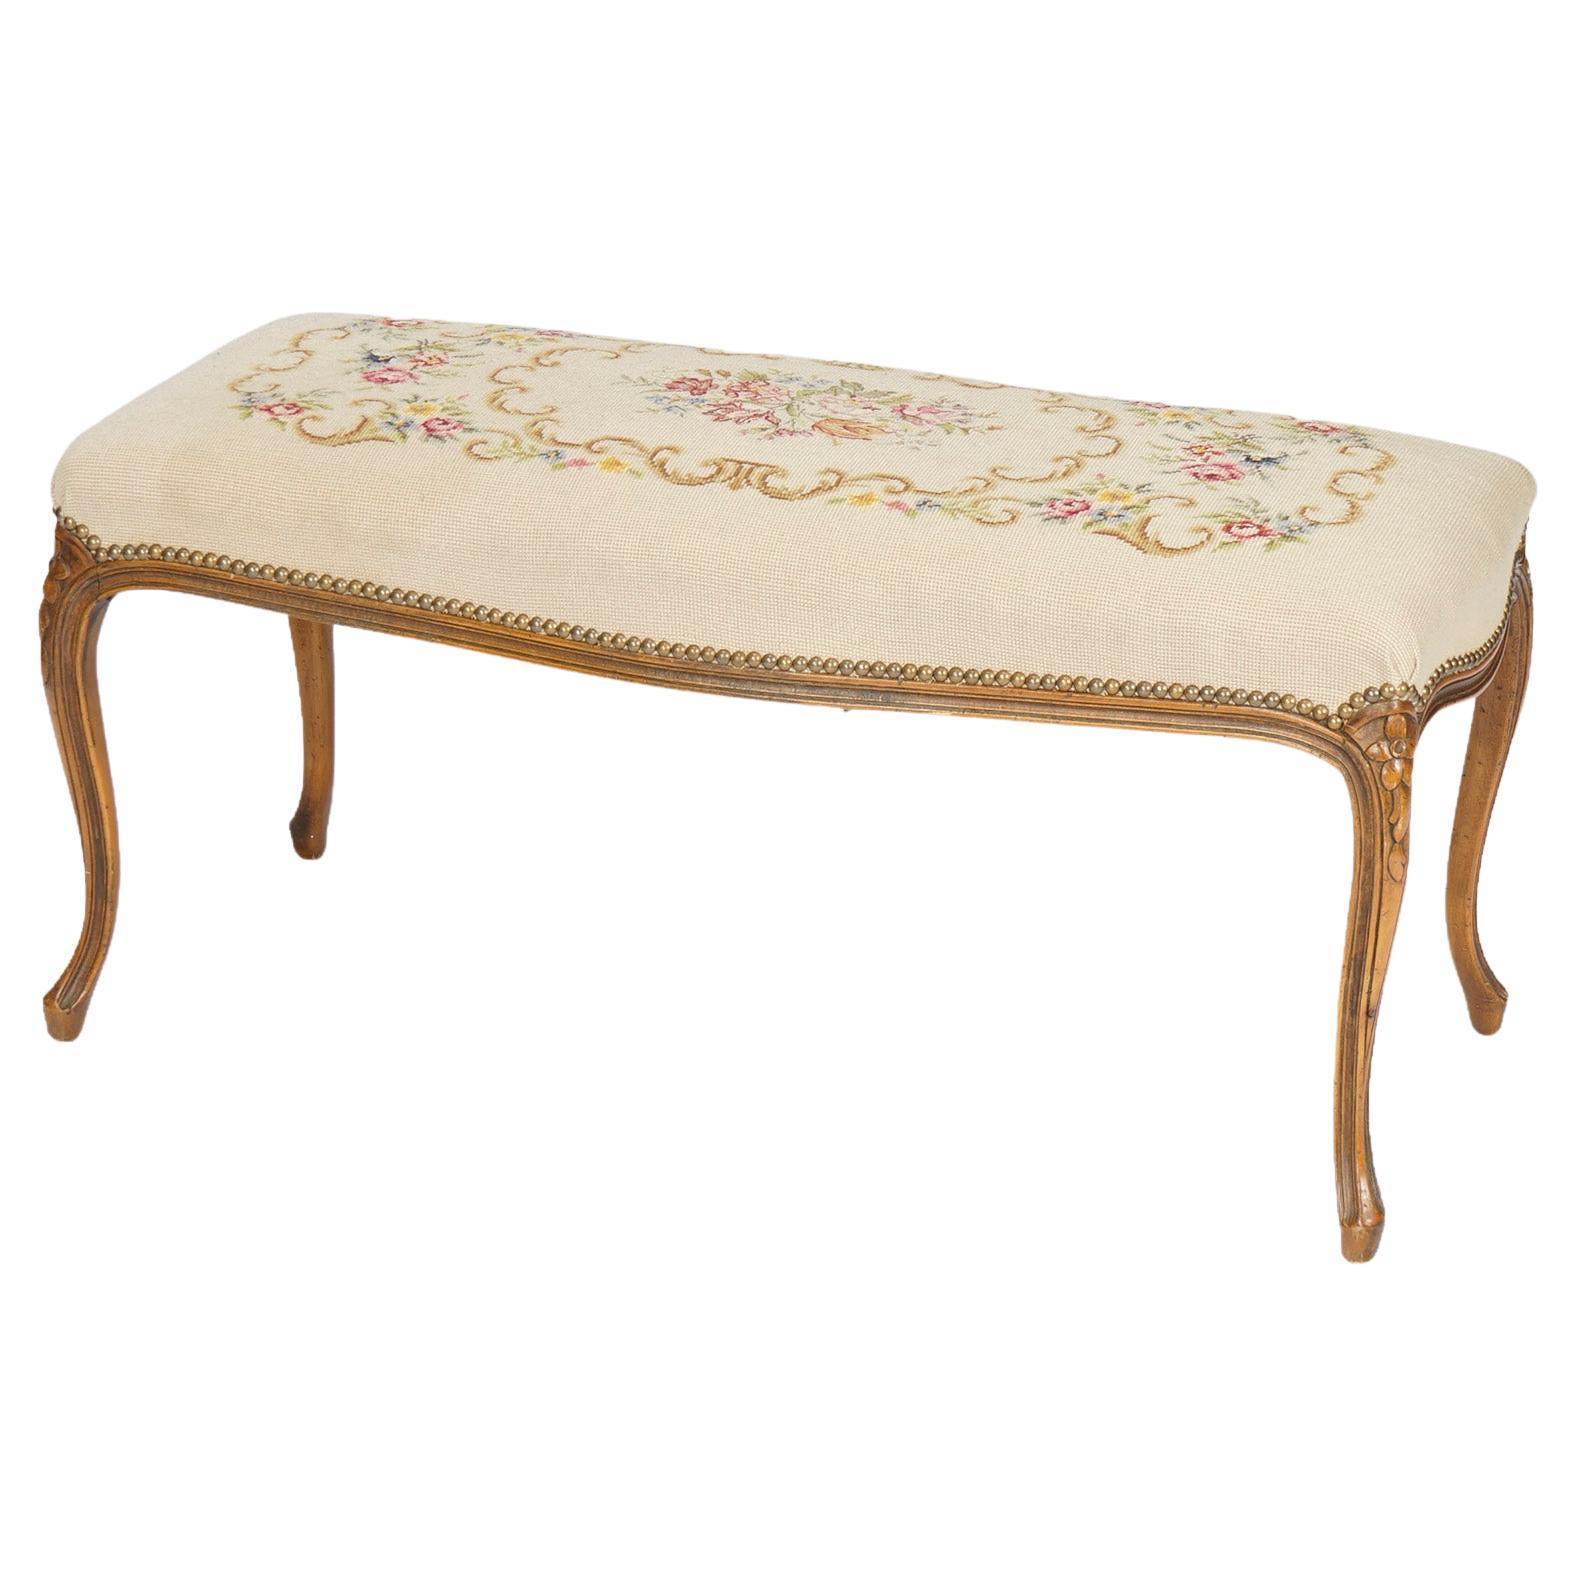 Antique French Louis XV Style Fruitwood & Needlepoint Long Bench, Circa 1930